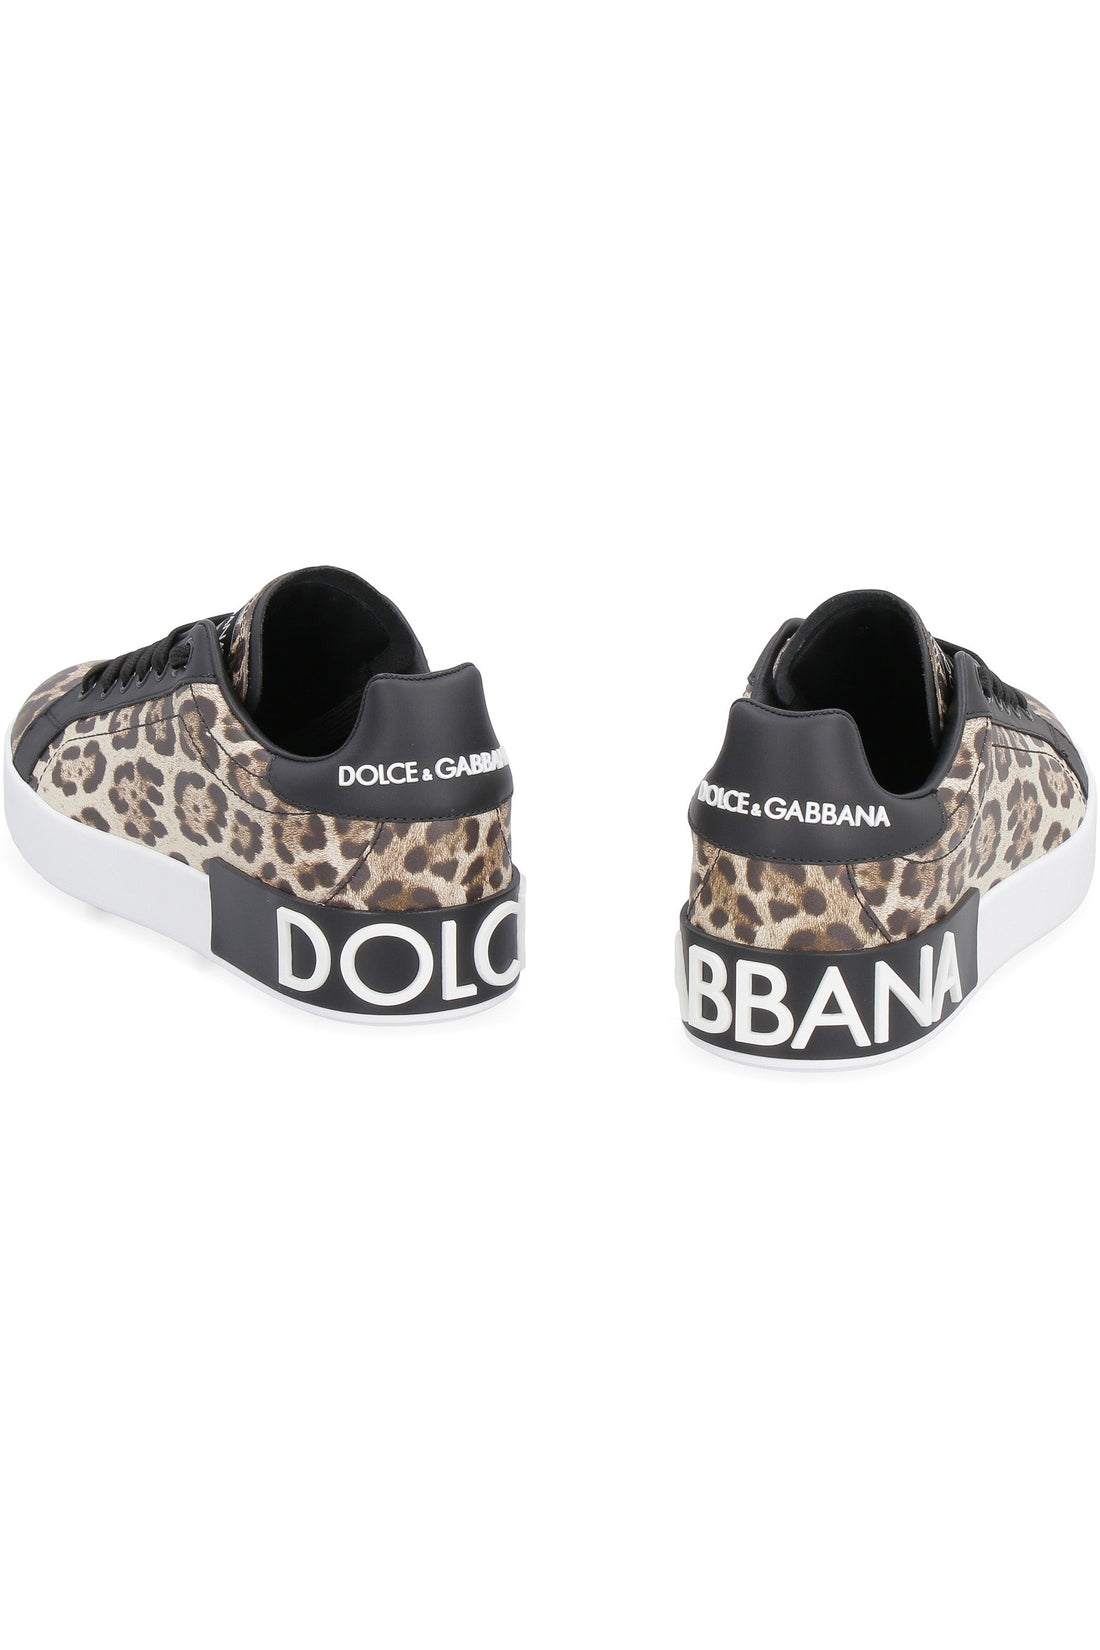 Dolce & Gabbana-OUTLET-SALE-Printed leather sneakers-ARCHIVIST